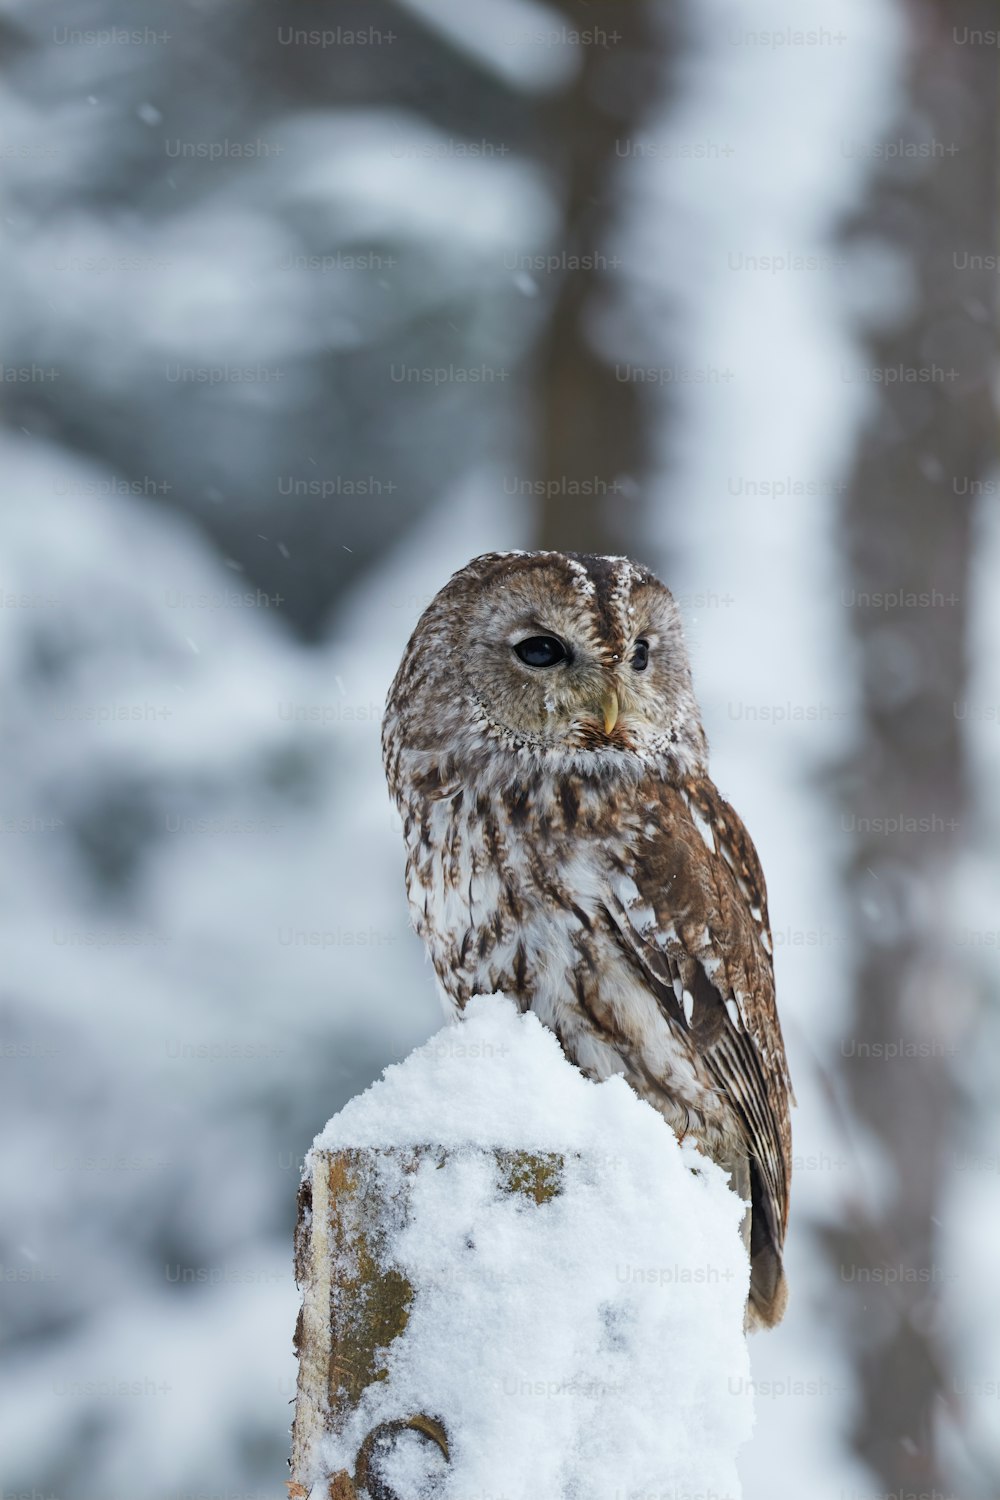 an owl sitting on a tree stump in the snow